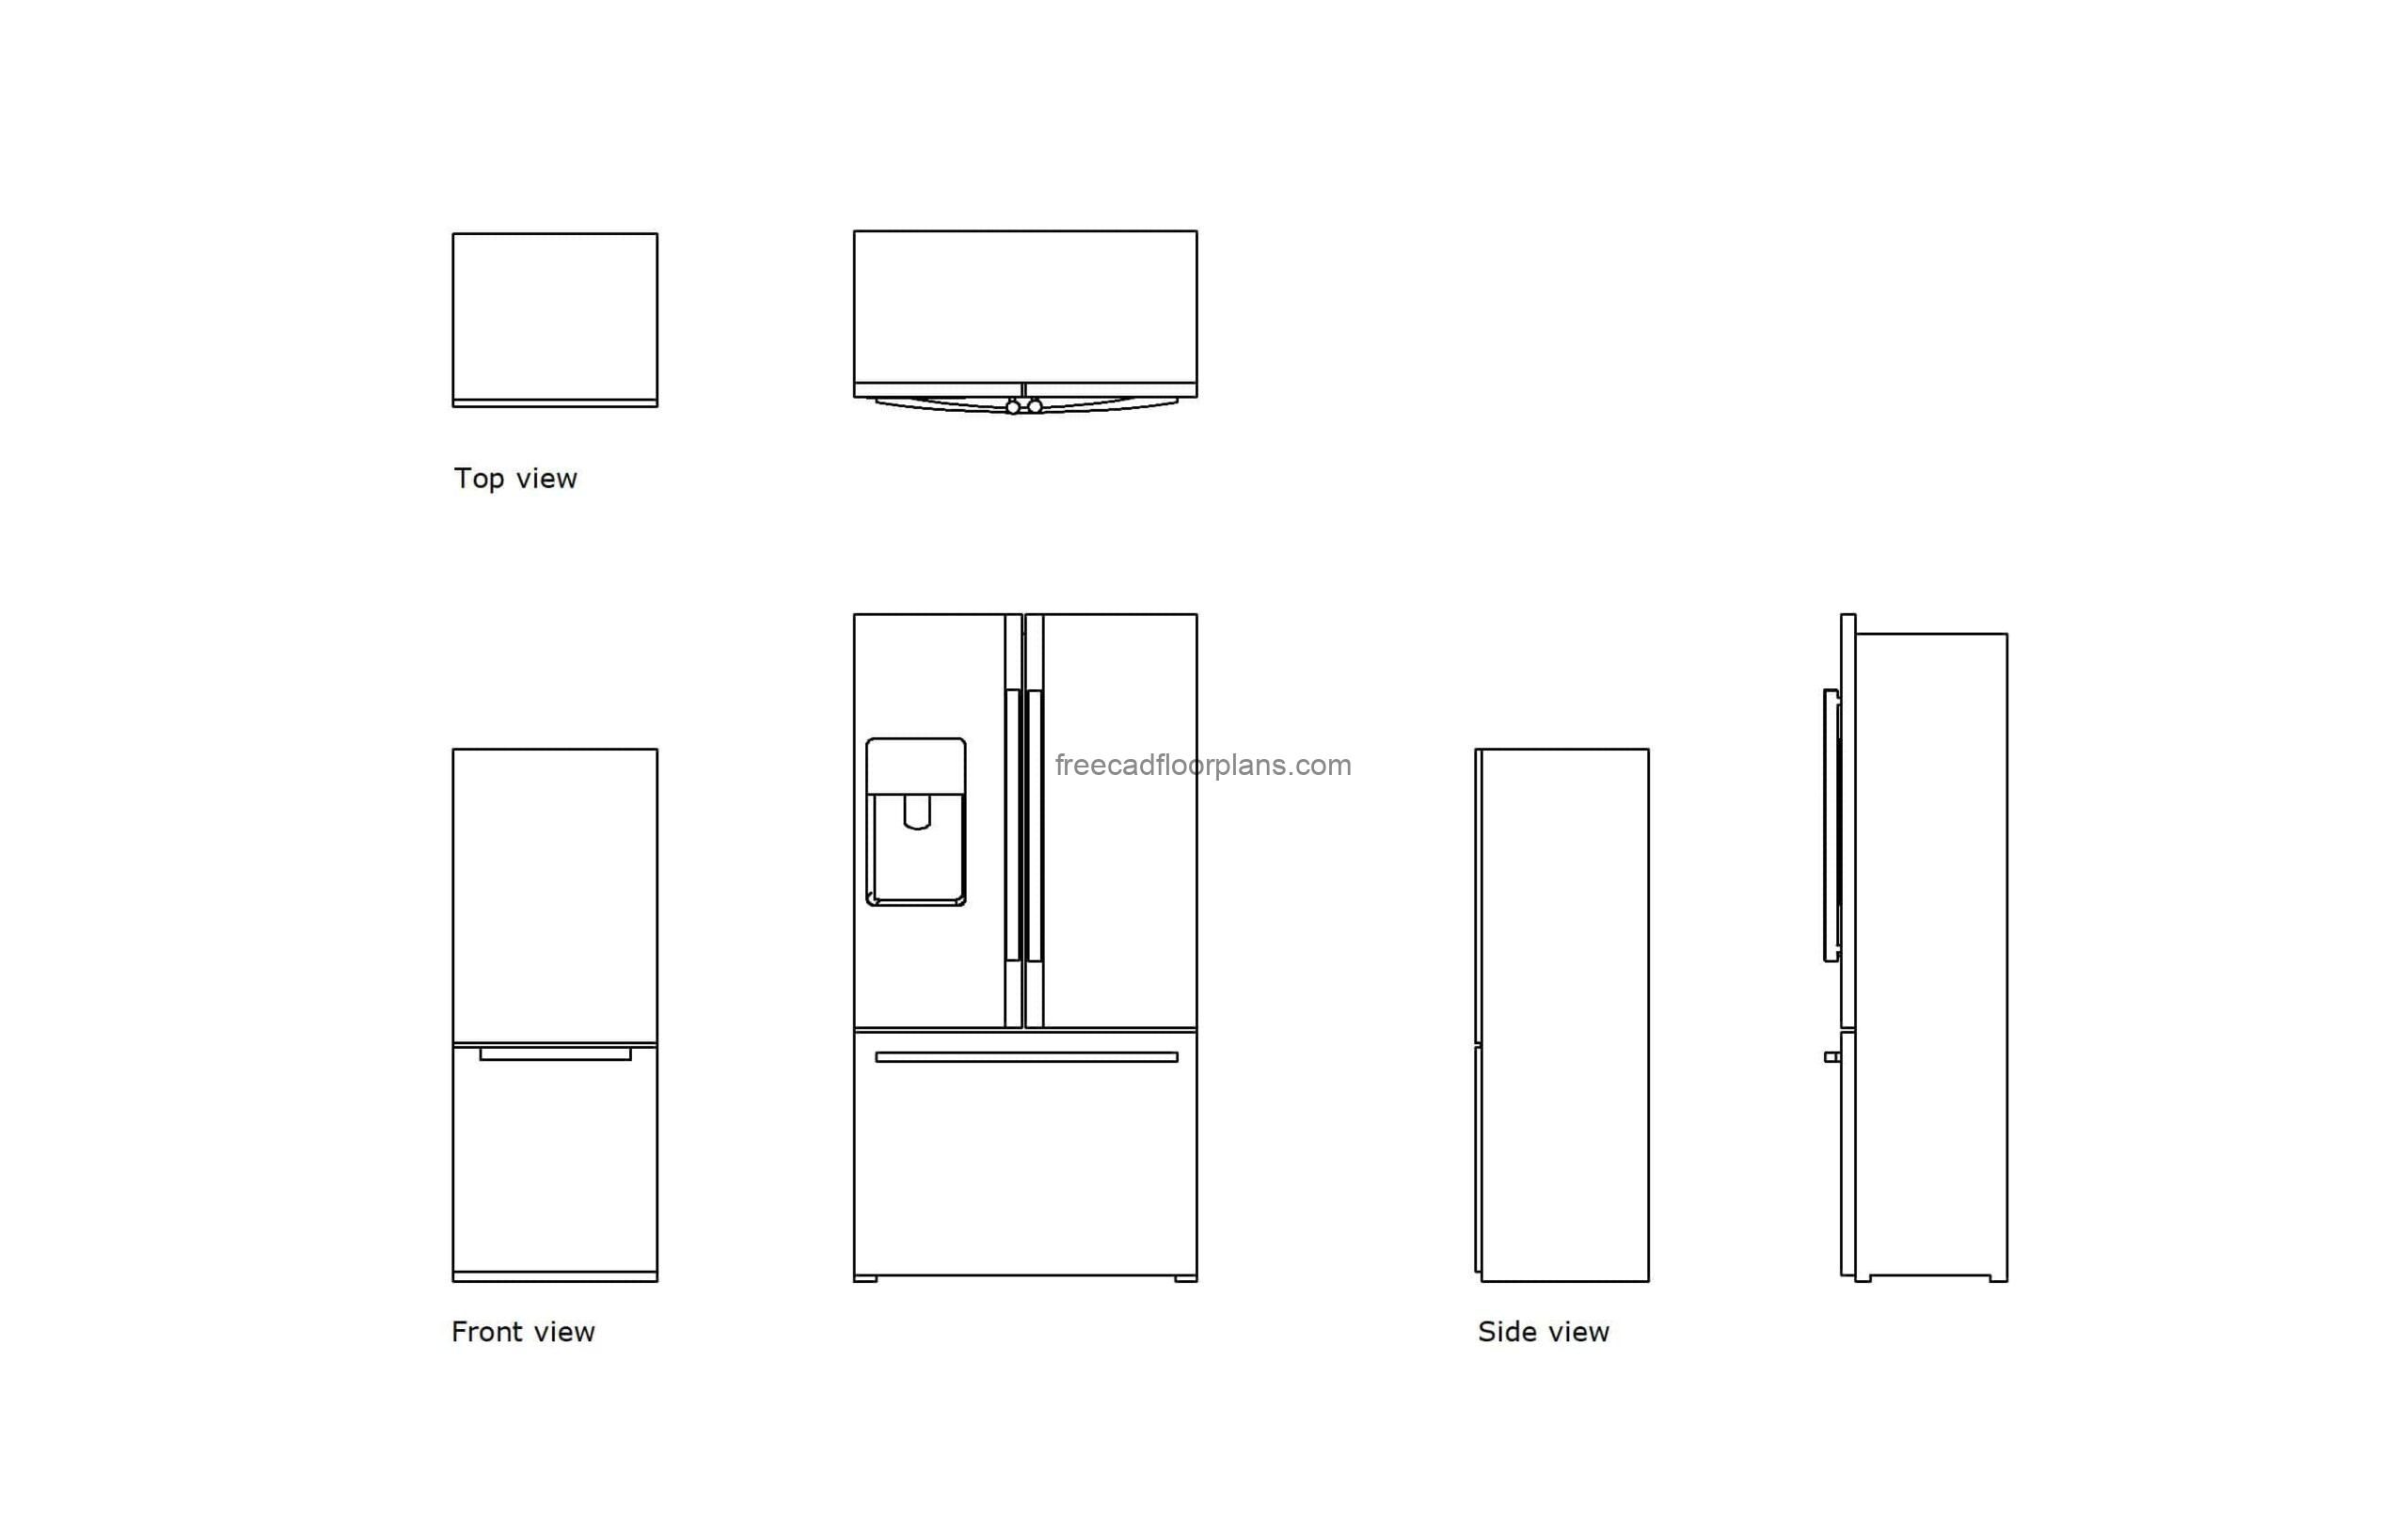 autocad drawing of tow different samsung fridges, plan and elevation 2d views, dwg file free for download